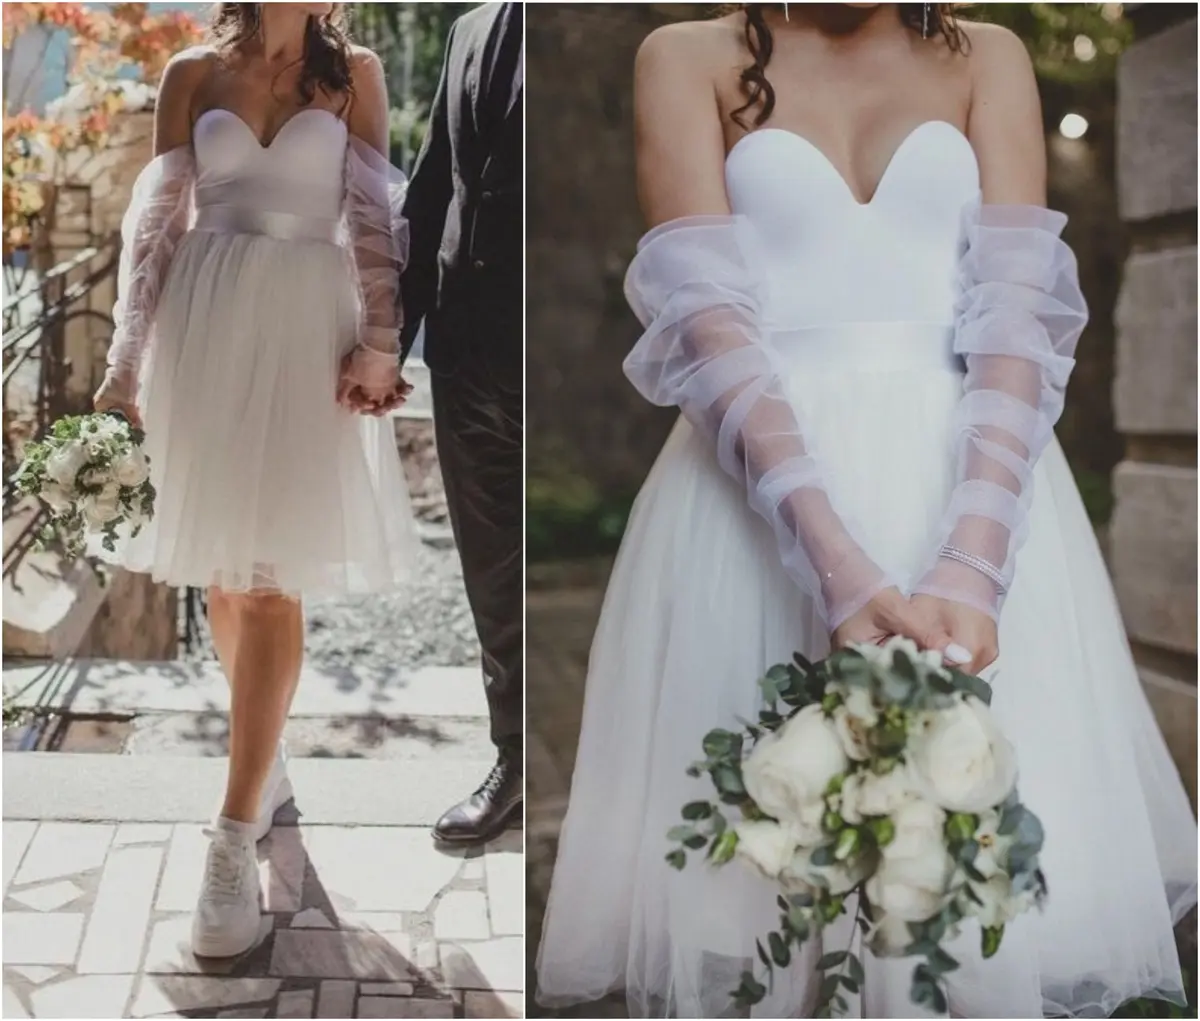 pleated skirt bridal dress paired with sneakers